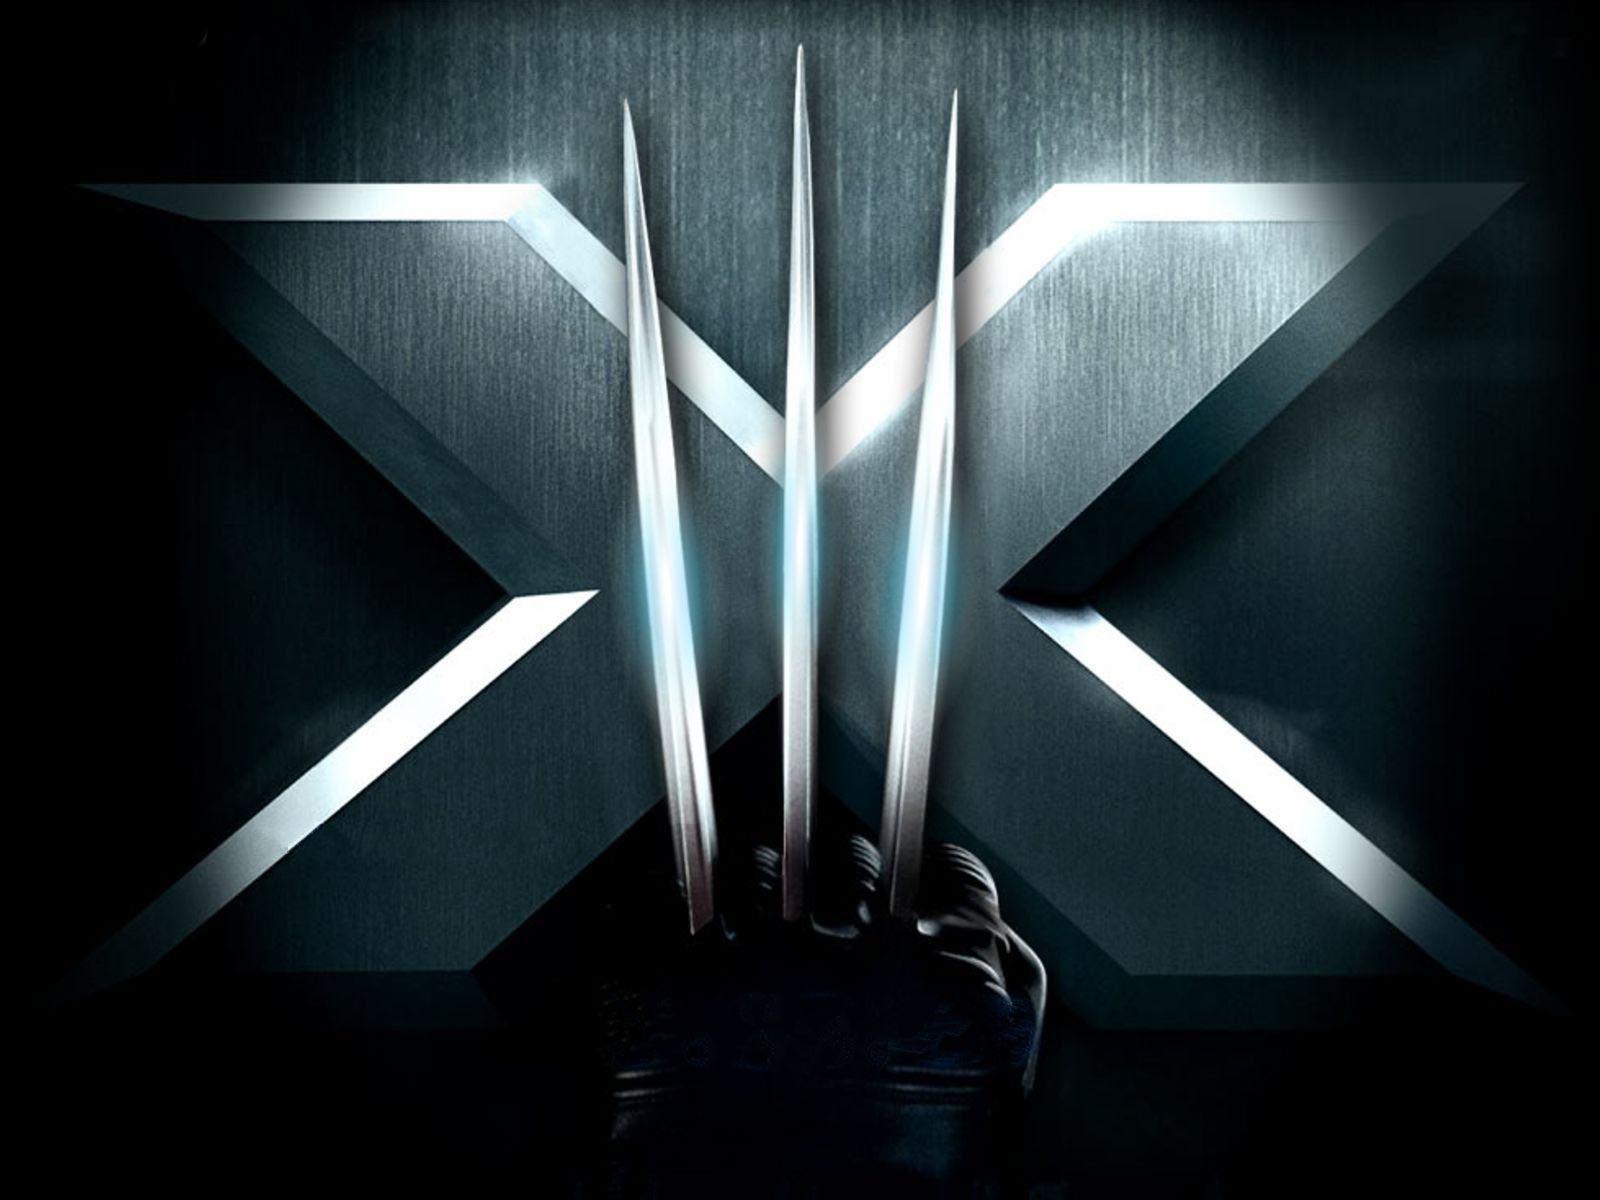 Wolverine Claws Wallpaper Free Wolverine Claws Background